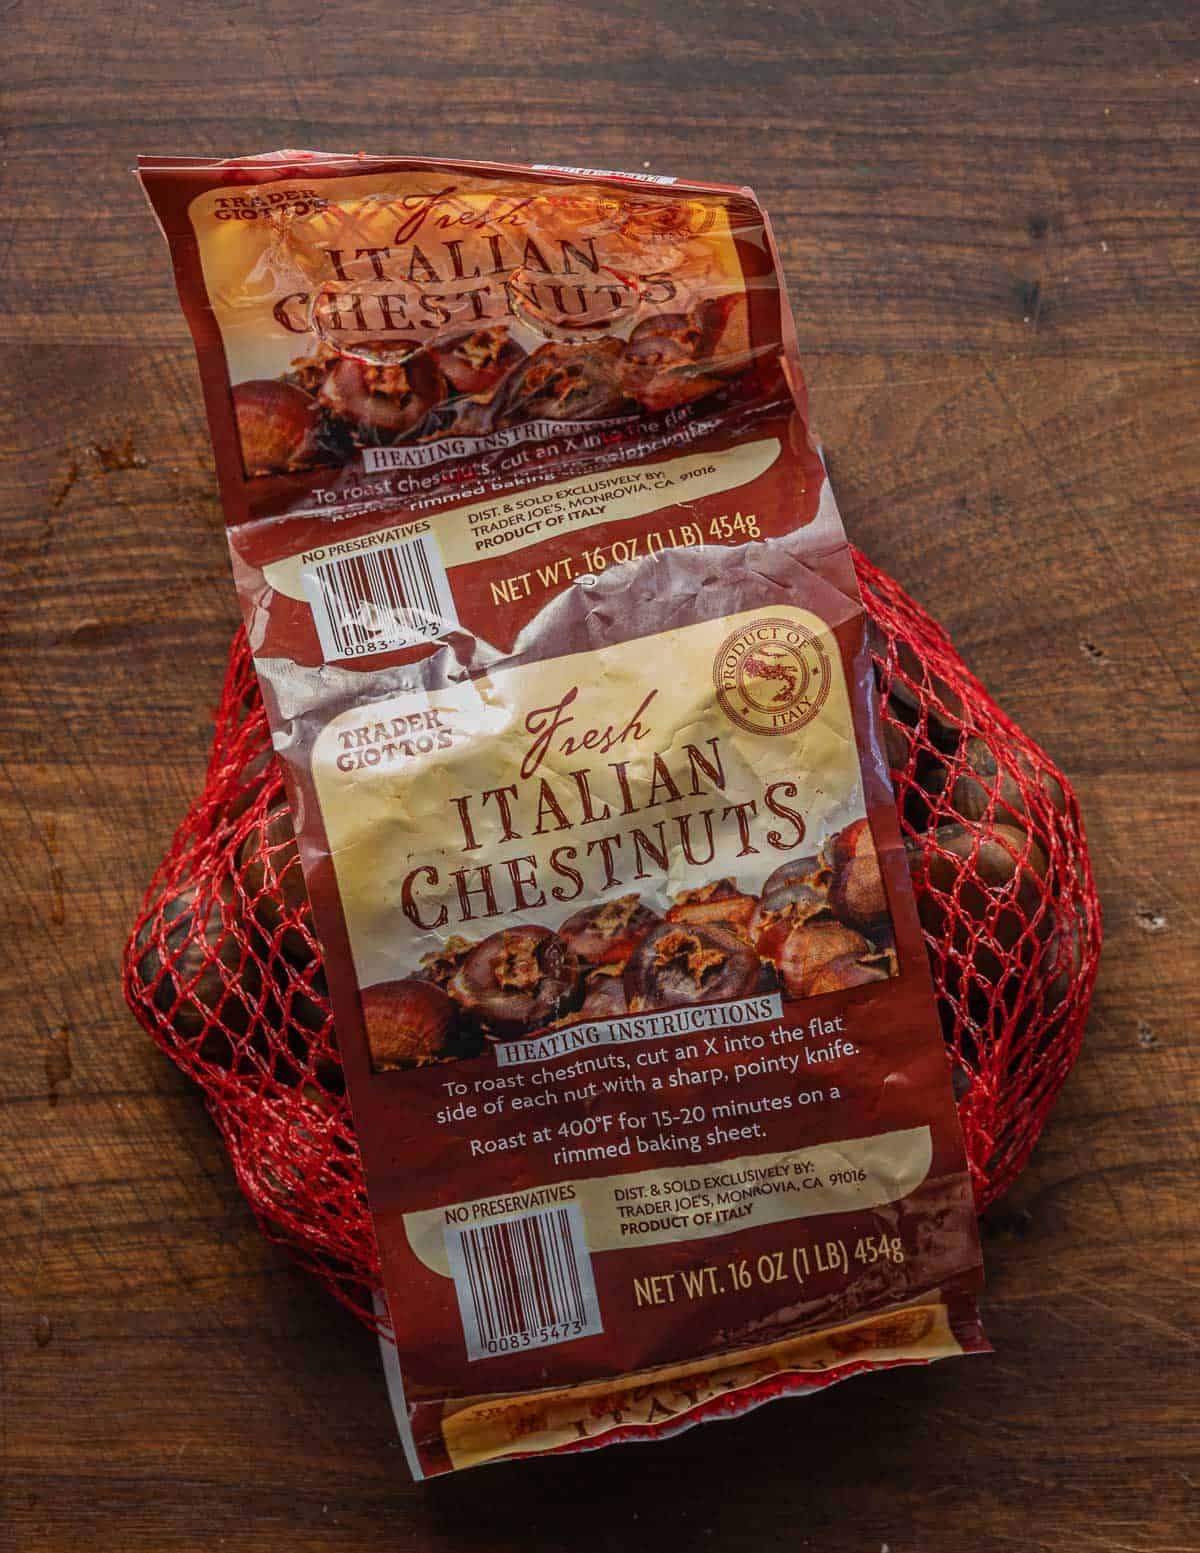 A bag of Trader Joes Italian Chestnuts.